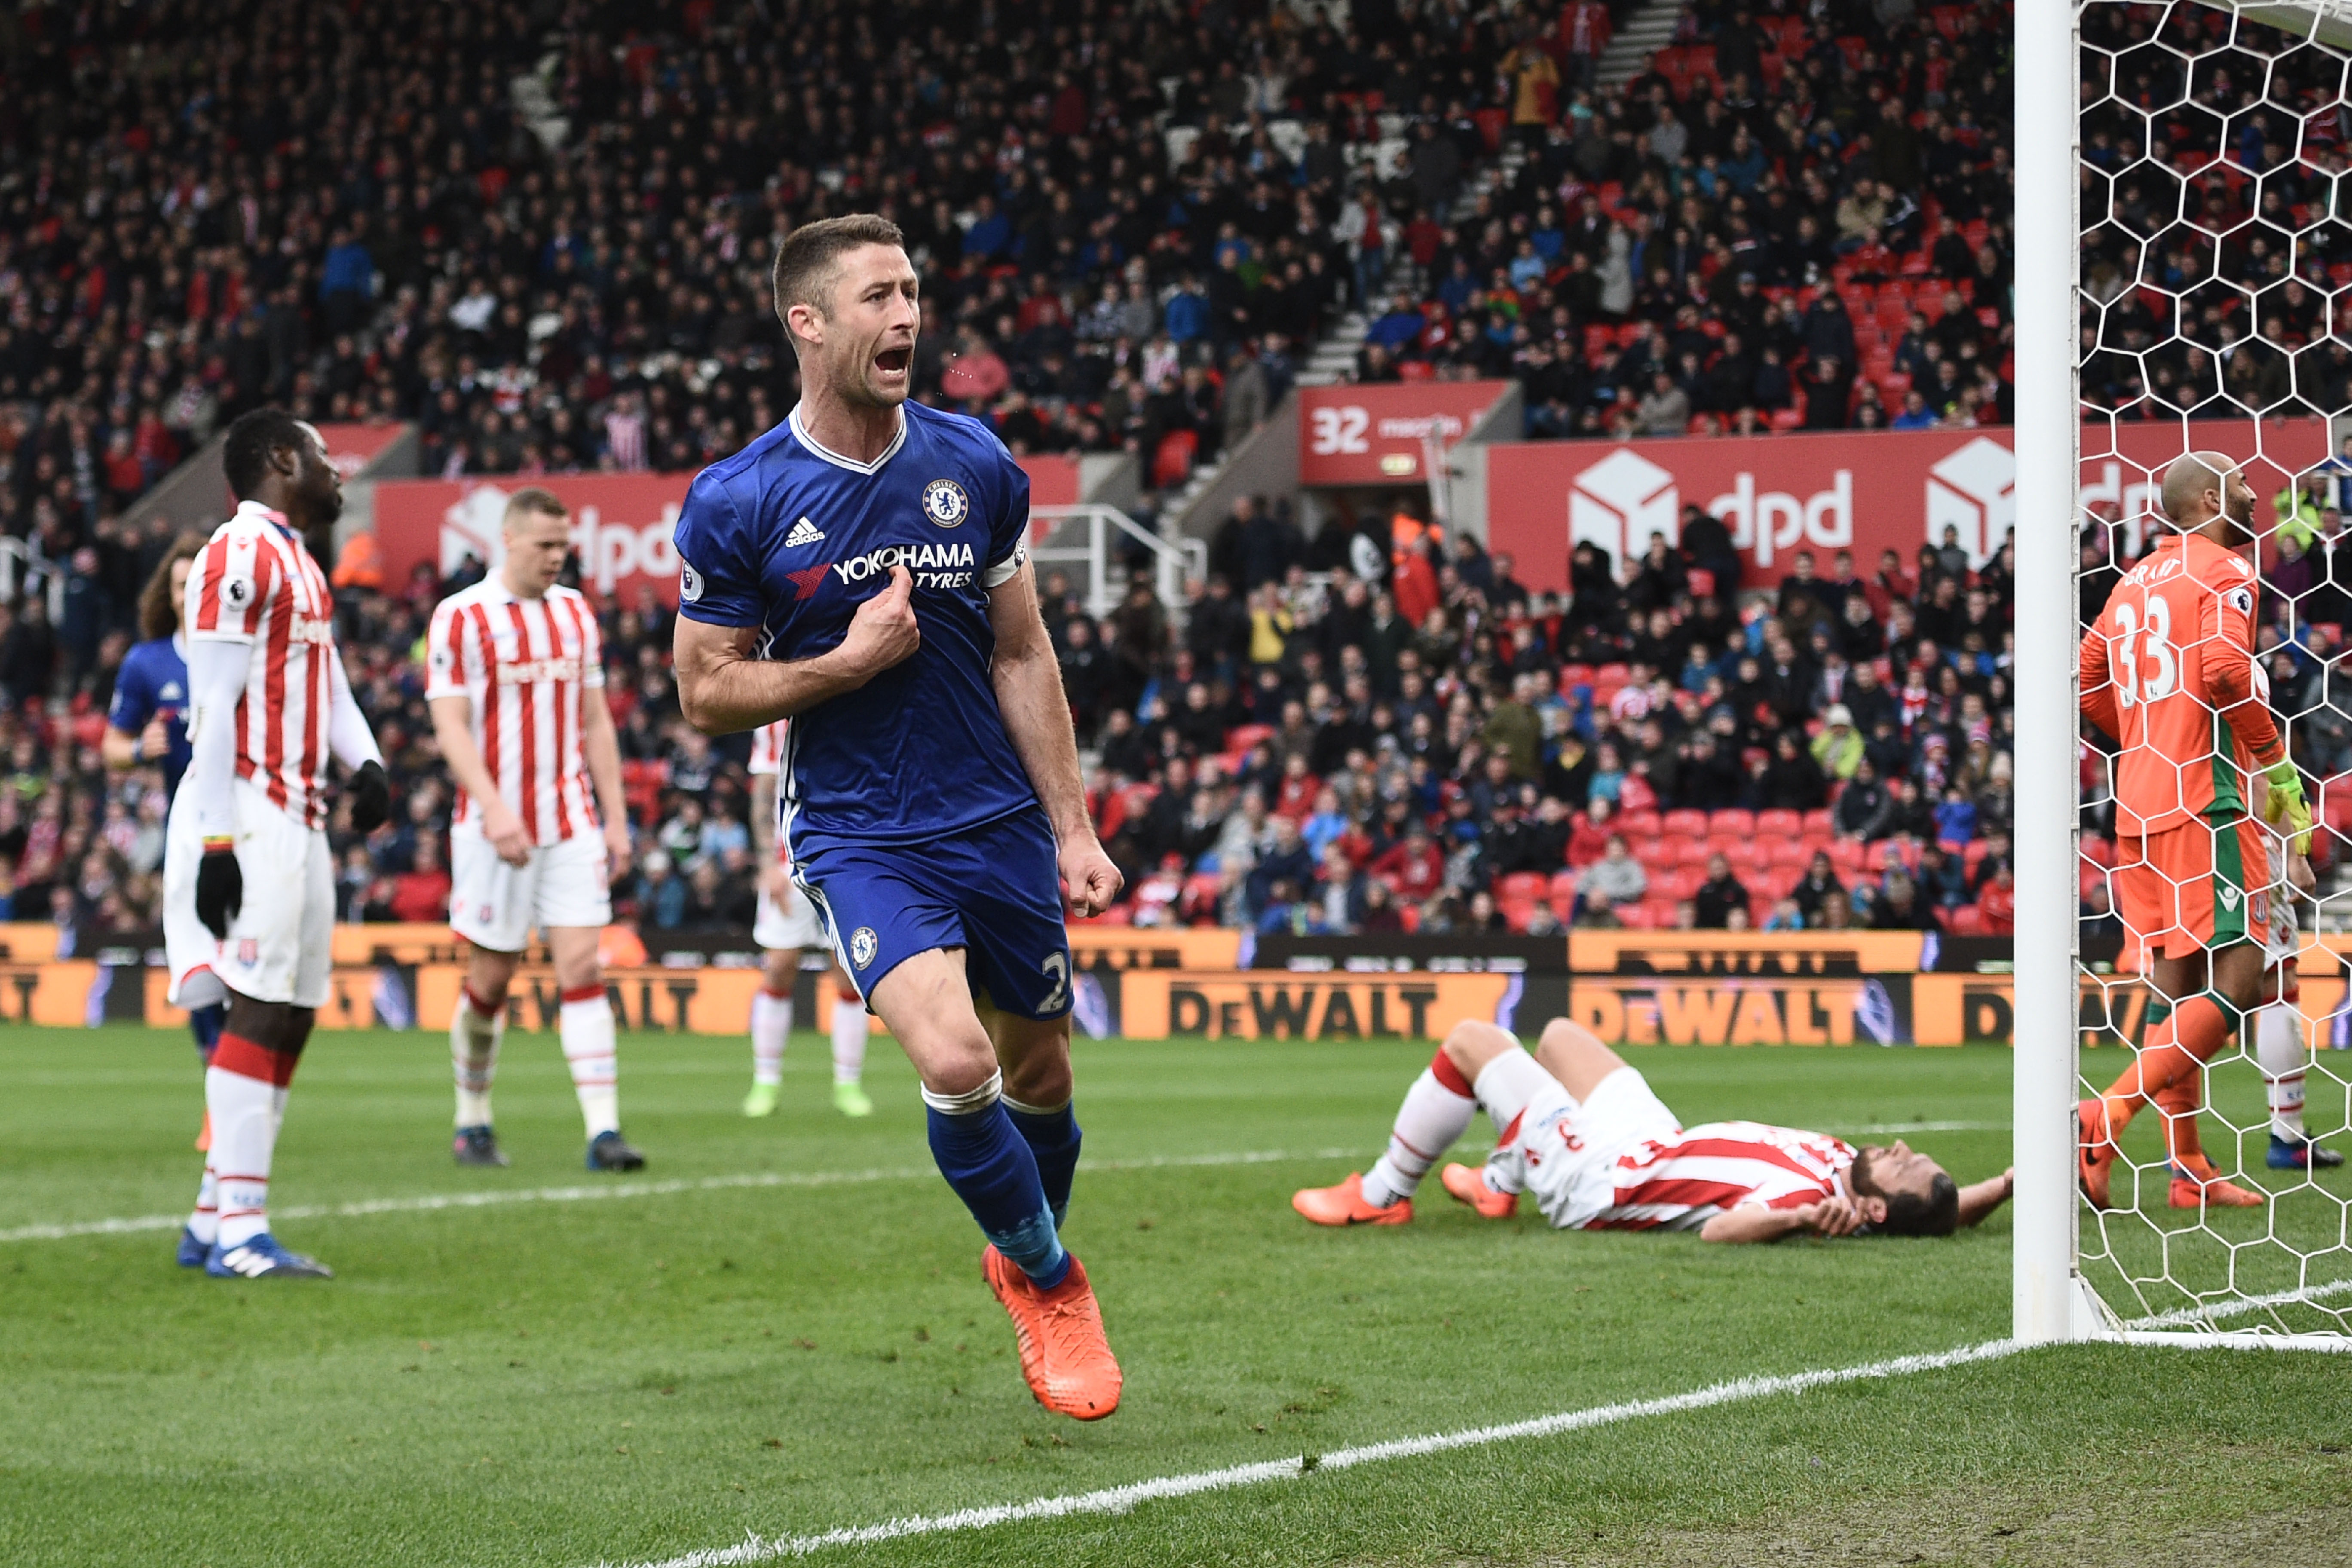 Chelsea's English defender Gary Cahill (C) celebrates after scoring their second goal during the English Premier League football match between Stoke City and Chelsea at the Bet365 Stadium in Stoke-on-Trent, central England on March 18, 2017. / AFP PHOTO / Oli SCARFF / RESTRICTED TO EDITORIAL USE. No use with unauthorized audio, video, data, fixture lists, club/league logos or 'live' services. Online in-match use limited to 75 images, no video emulation. No use in betting, games or single club/league/player publications.  /         (Photo credit should read OLI SCARFF/AFP/Getty Images)